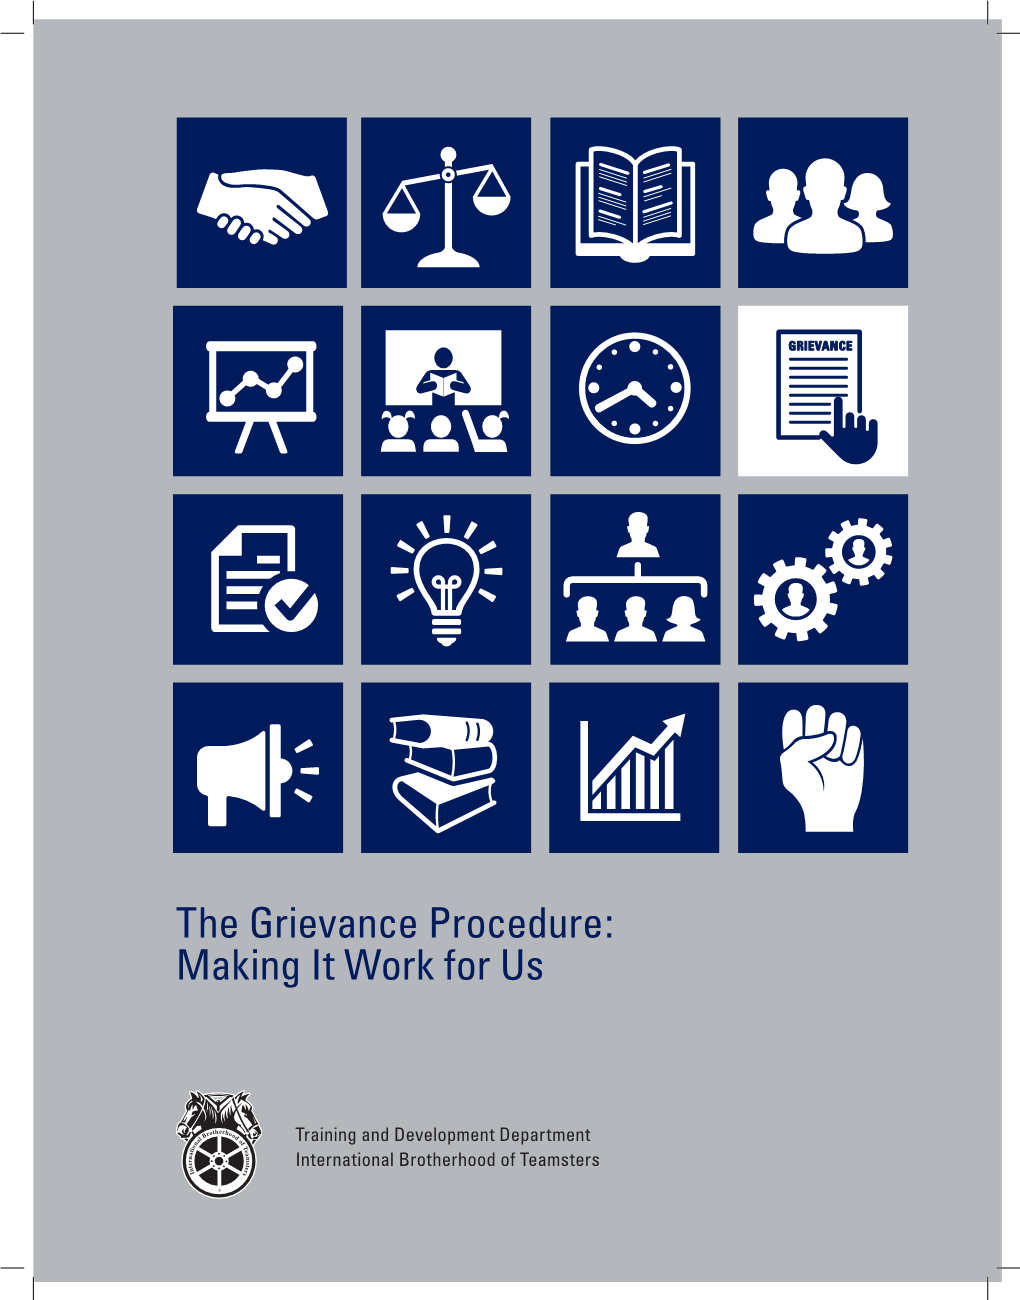 The Grievance Procedure: Making It Work for Us